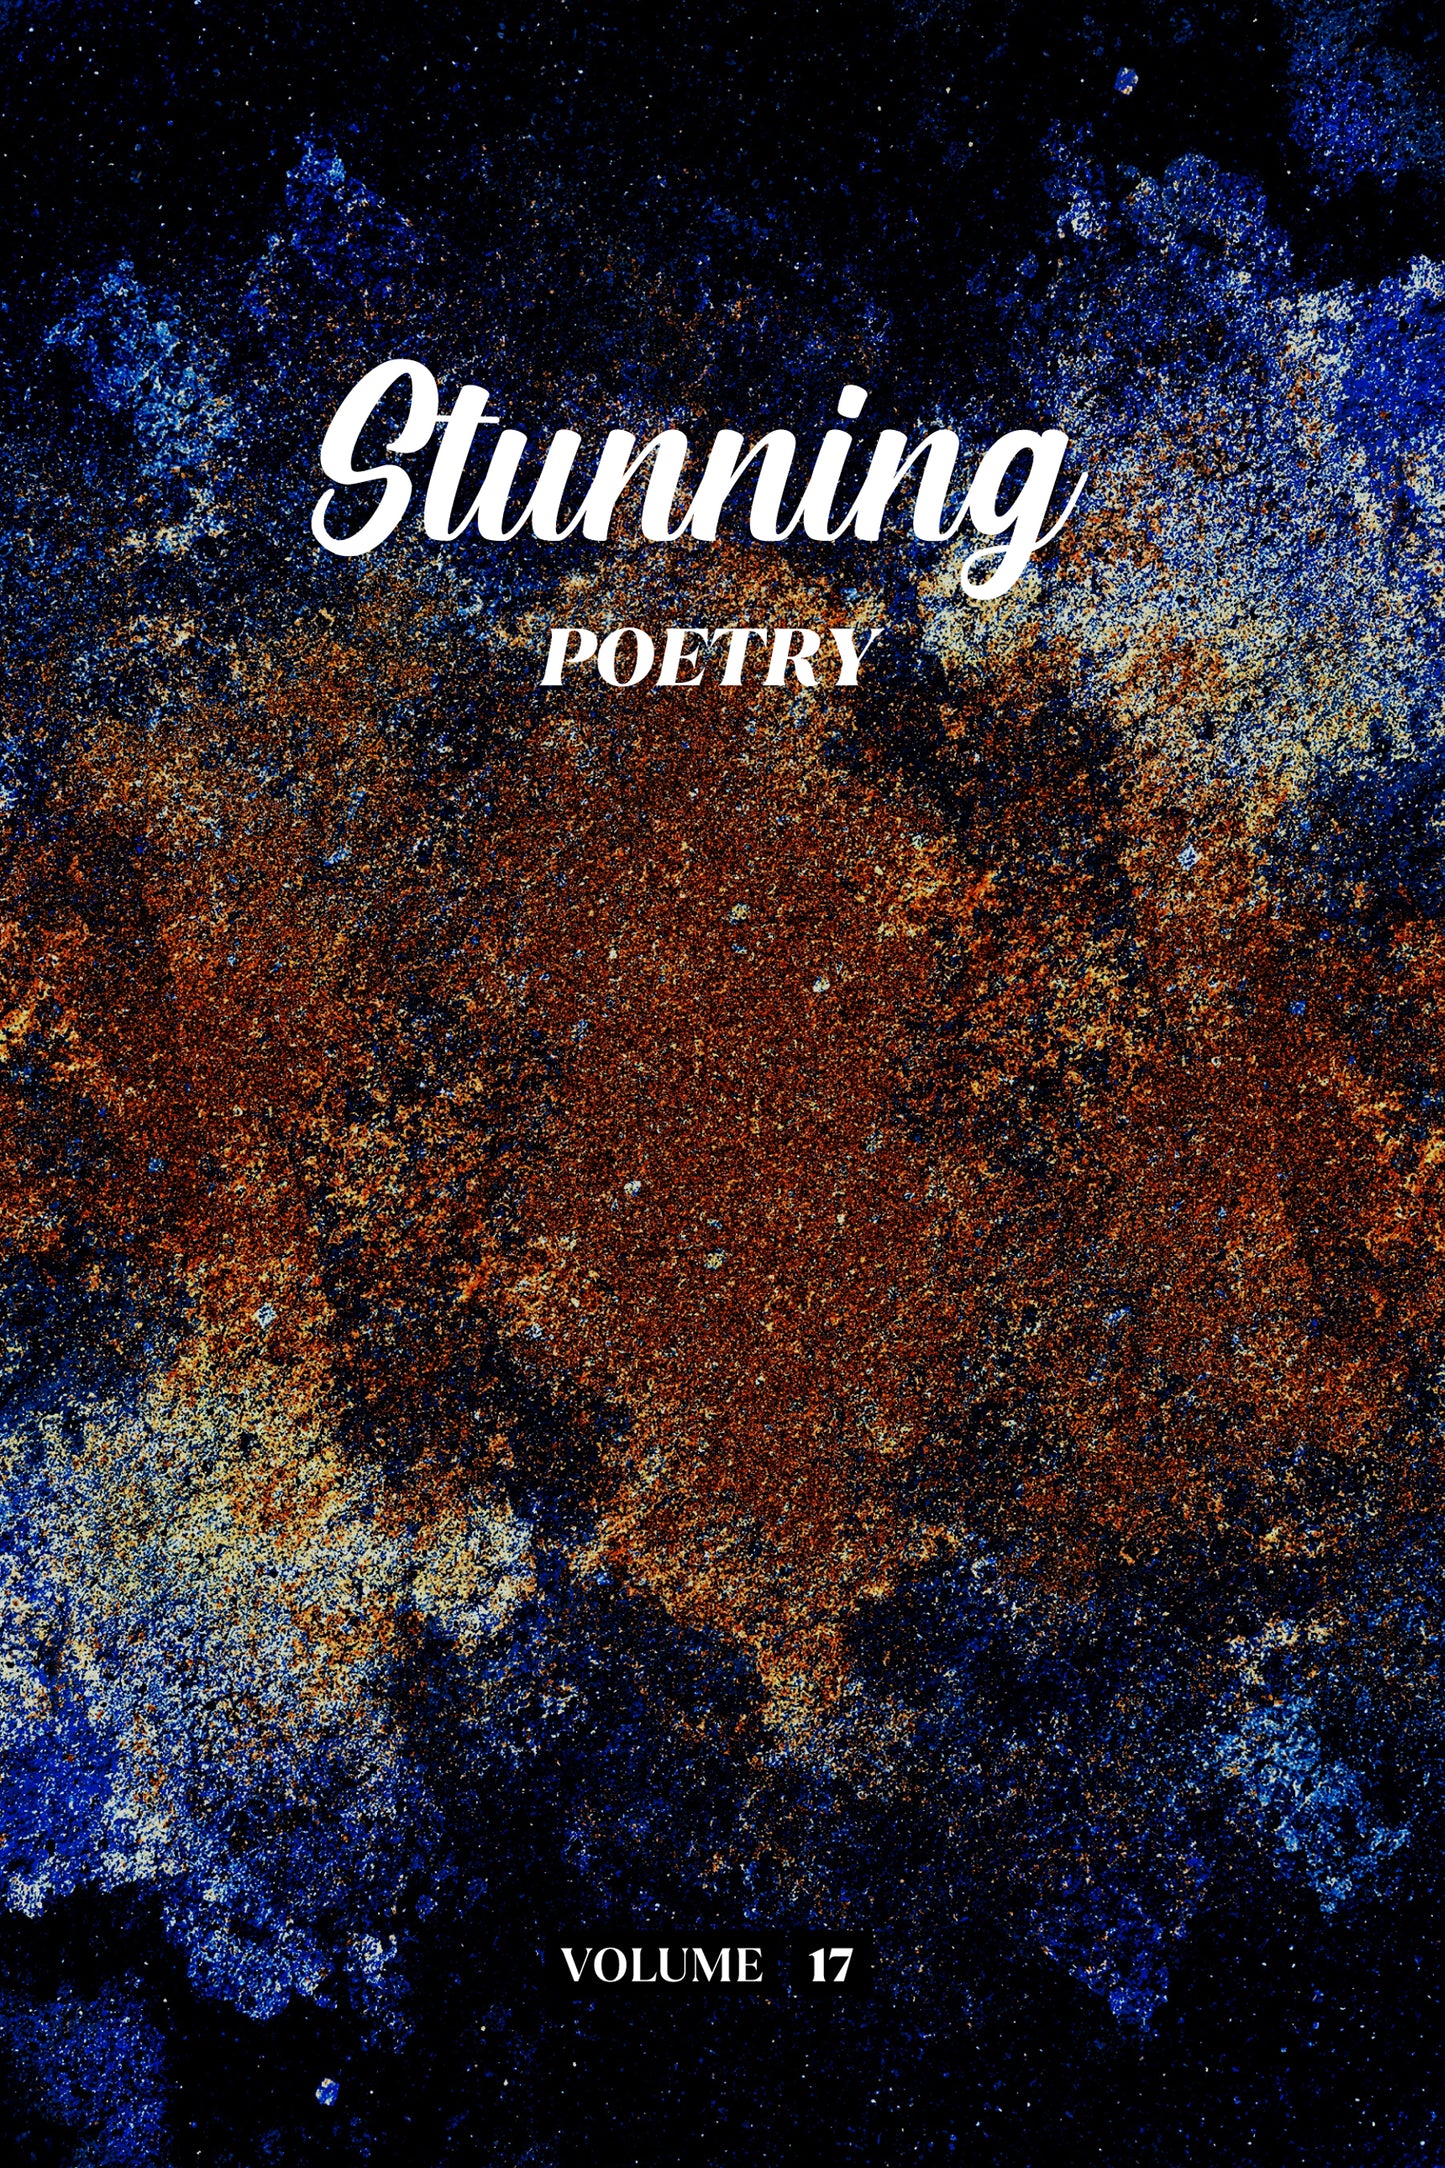 Stunning Poetry (Volume 17) - Physical Book